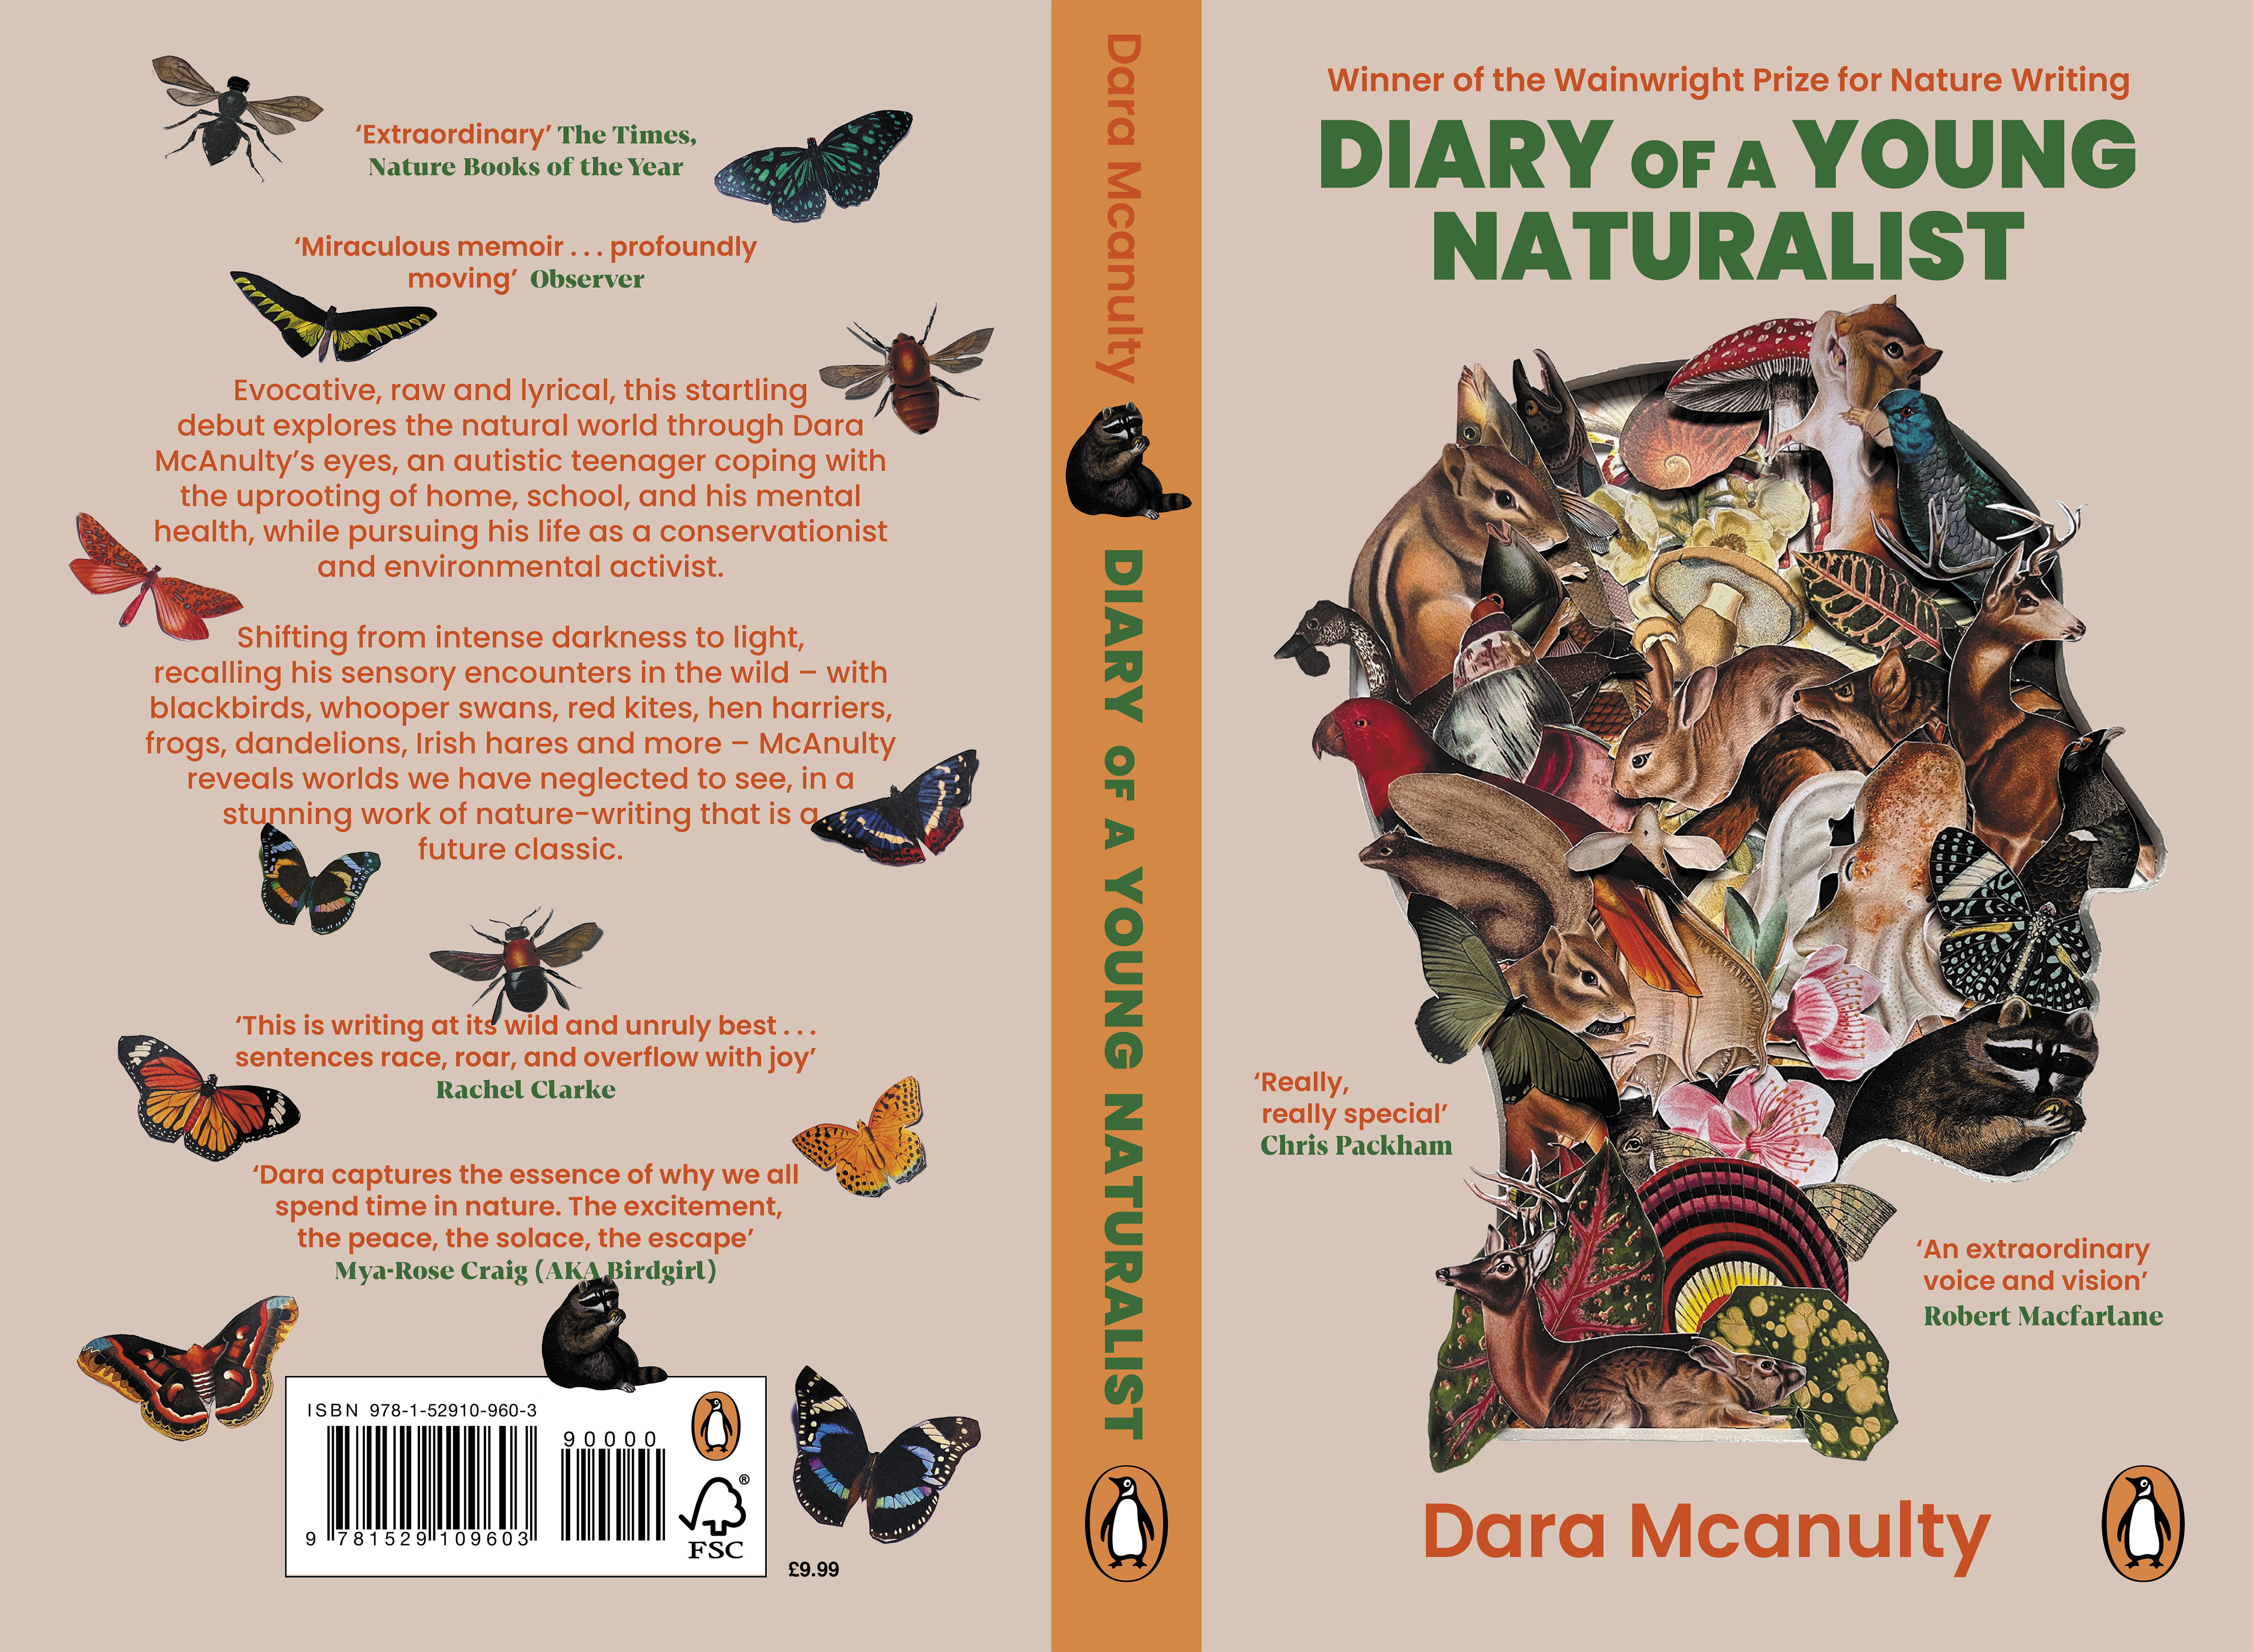 Book cover design by Jake Cook, for Dara McAnulty's diary of a young naturalist. Showing nature illustrations collaged into a profile head shape.